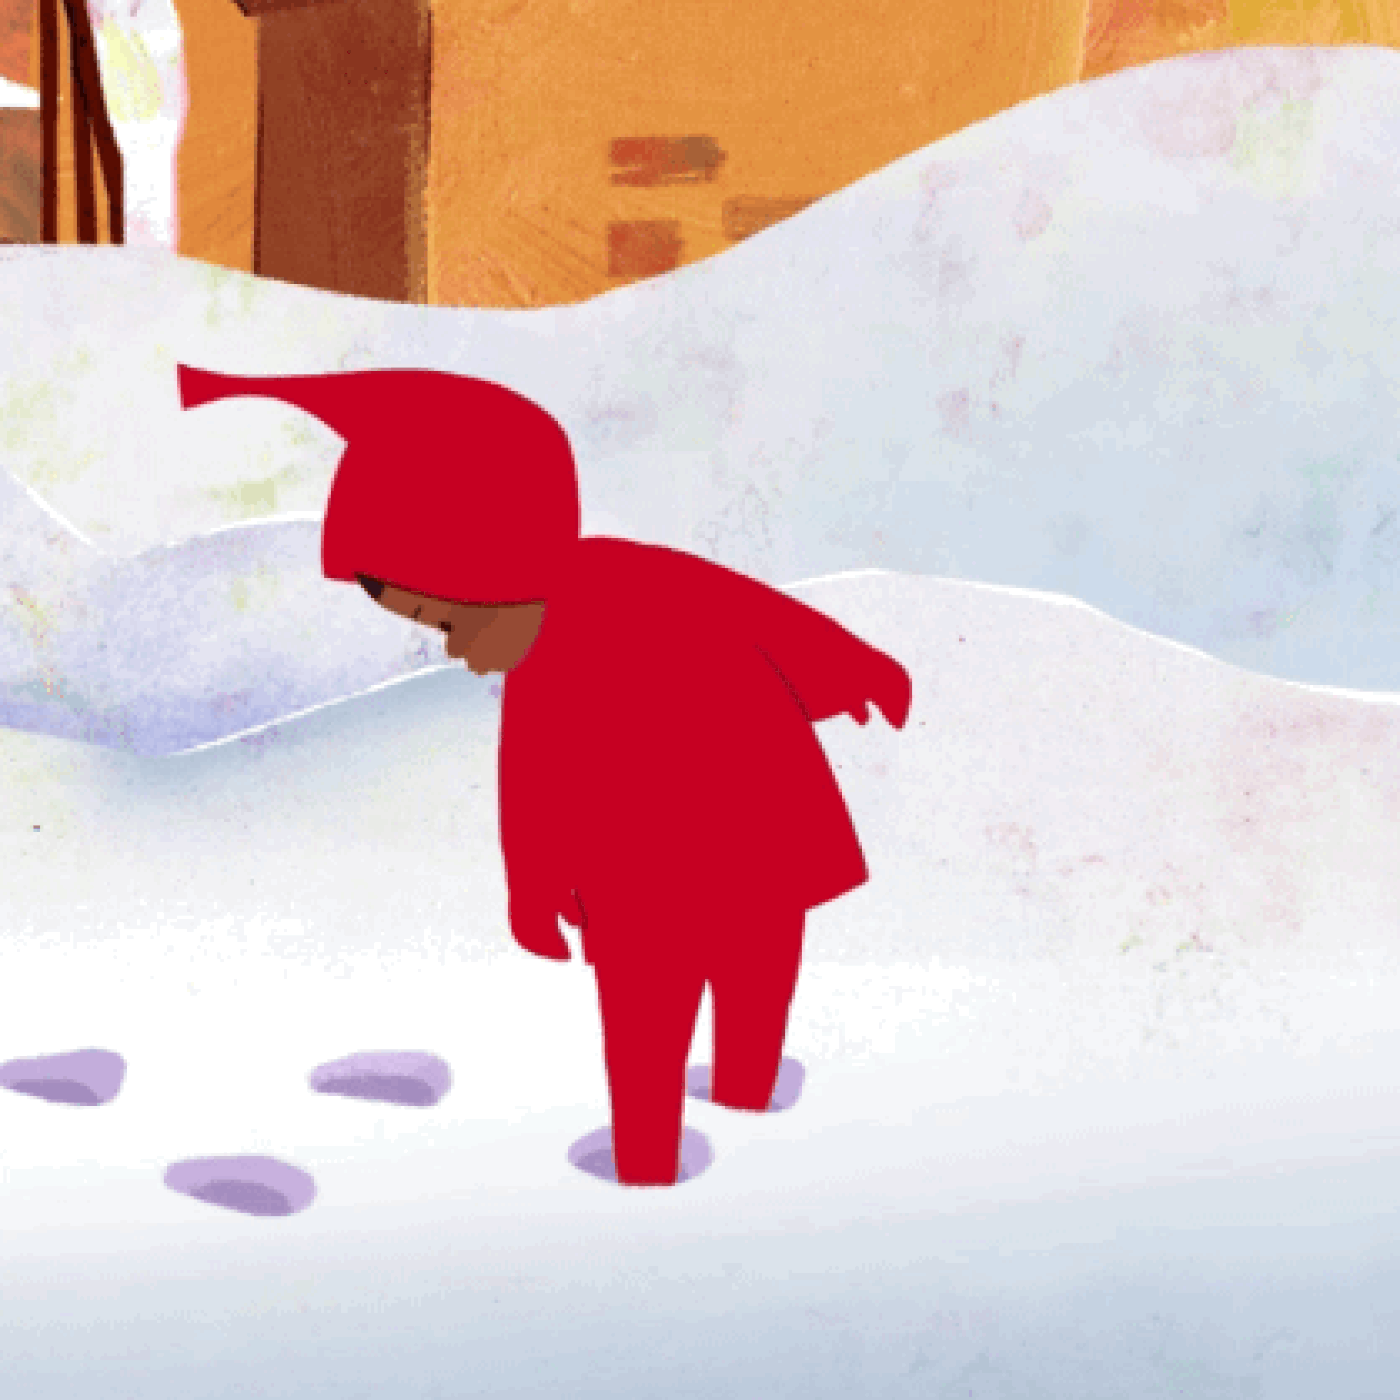 The Snowy Day is Amazon's beautiful, hopeful addition to television ...